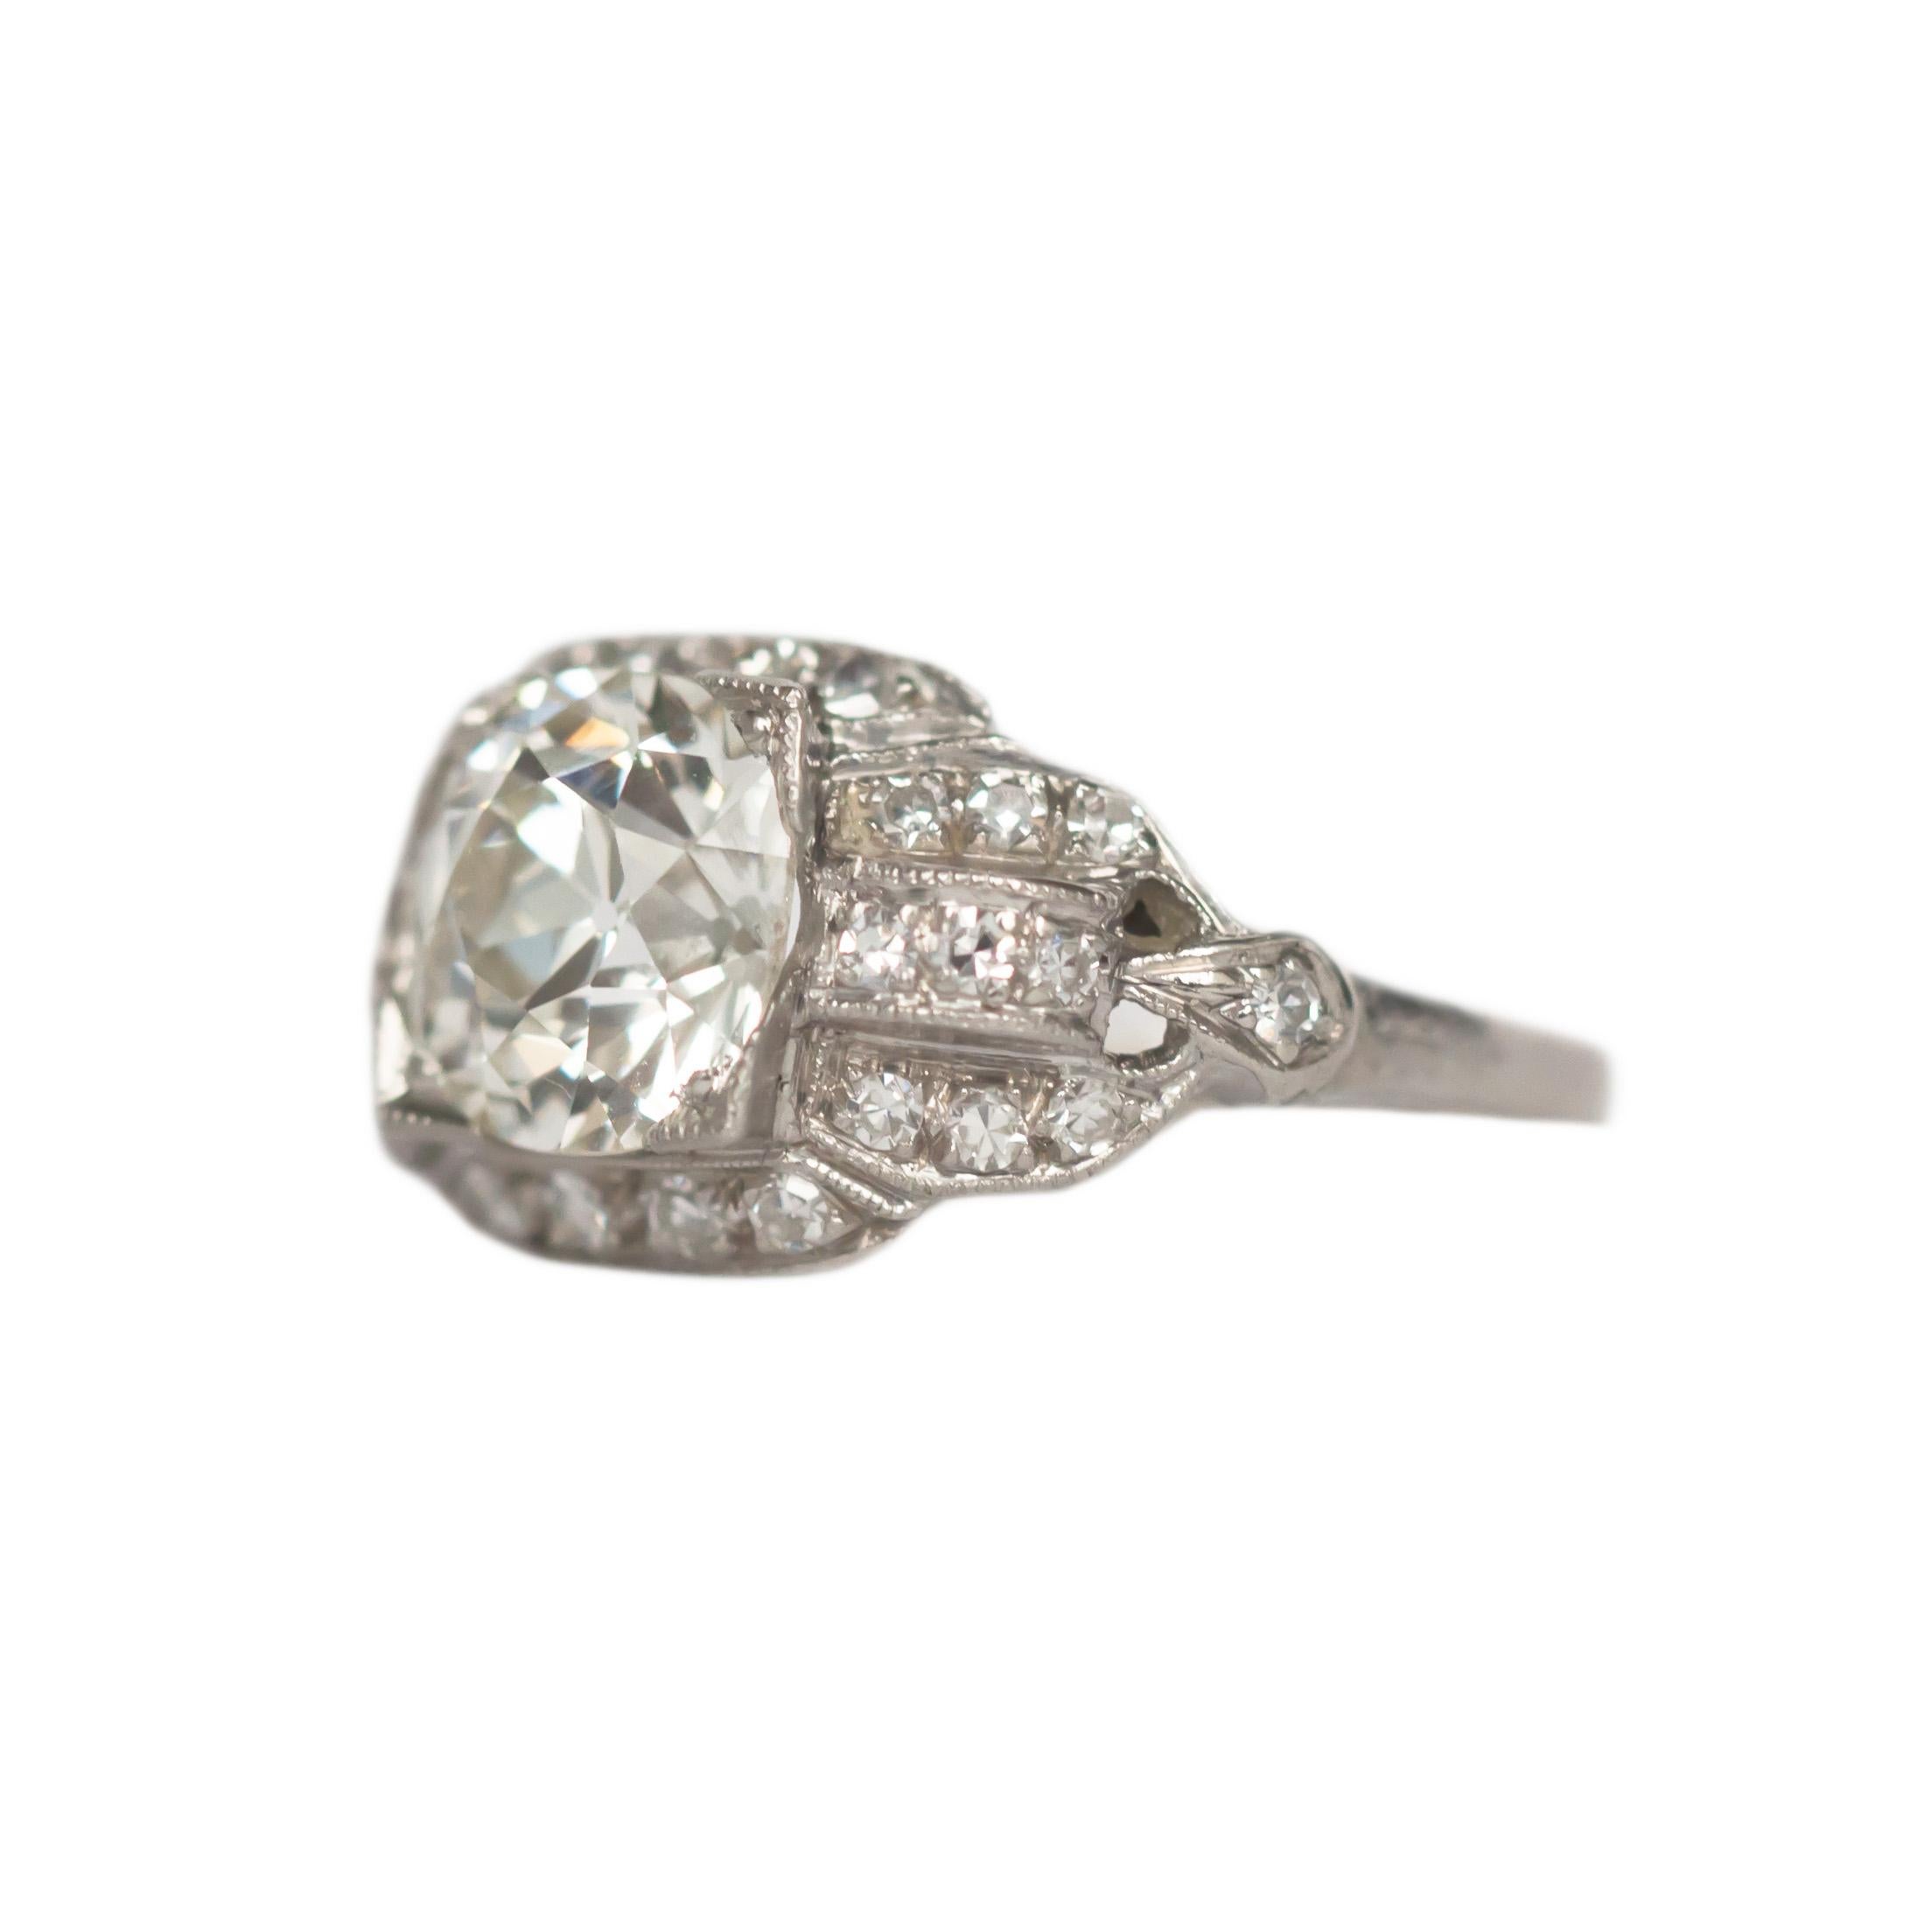 Item Details: 
Ring Size: 4.95
Metal Type: Platinum [Hallmarked, and Tested]
Weight: 3.6 grams

Center Diamond Details:
GIA REPORT # 2201792868
Weight: 1.69 carat
Cut: Antique Cushion [Old Mine Brilliant]
Color: K 
Clarity: VVS2

Side Diamond